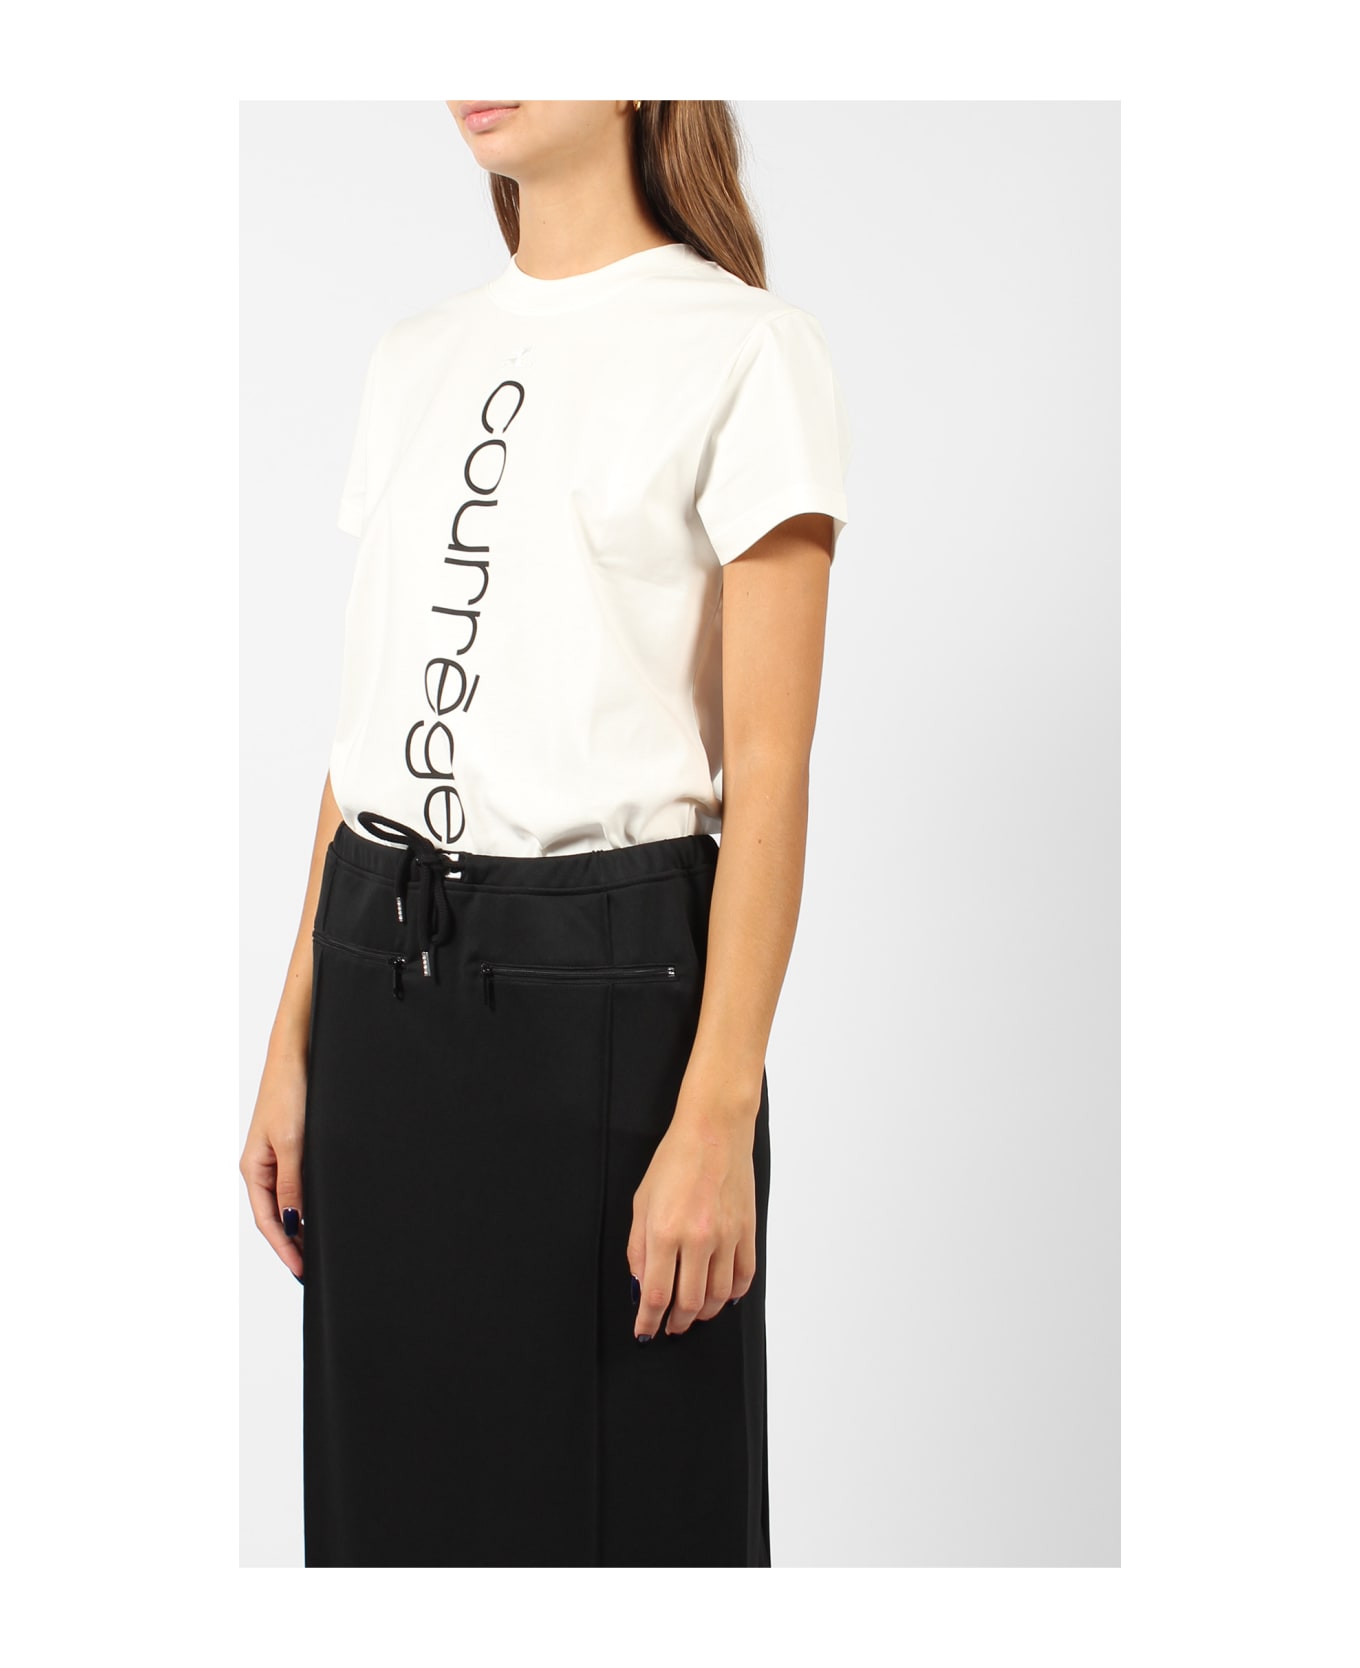 Courrèges Ac Straight Printed T-shirt - White Tシャツ